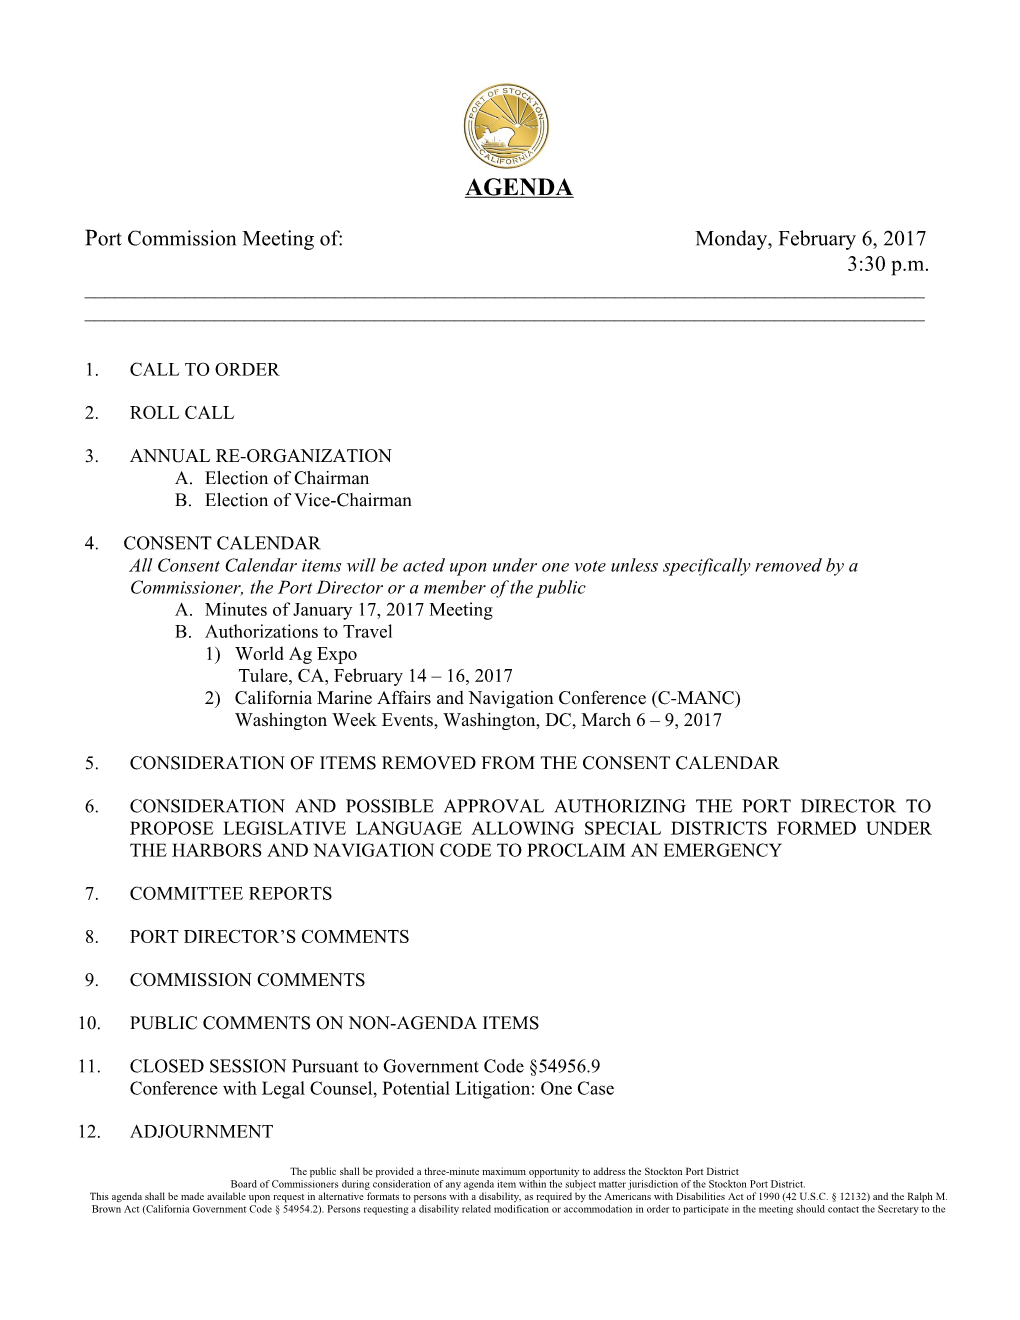 Port Commission Meeting Of: Monday, February 6, 2017